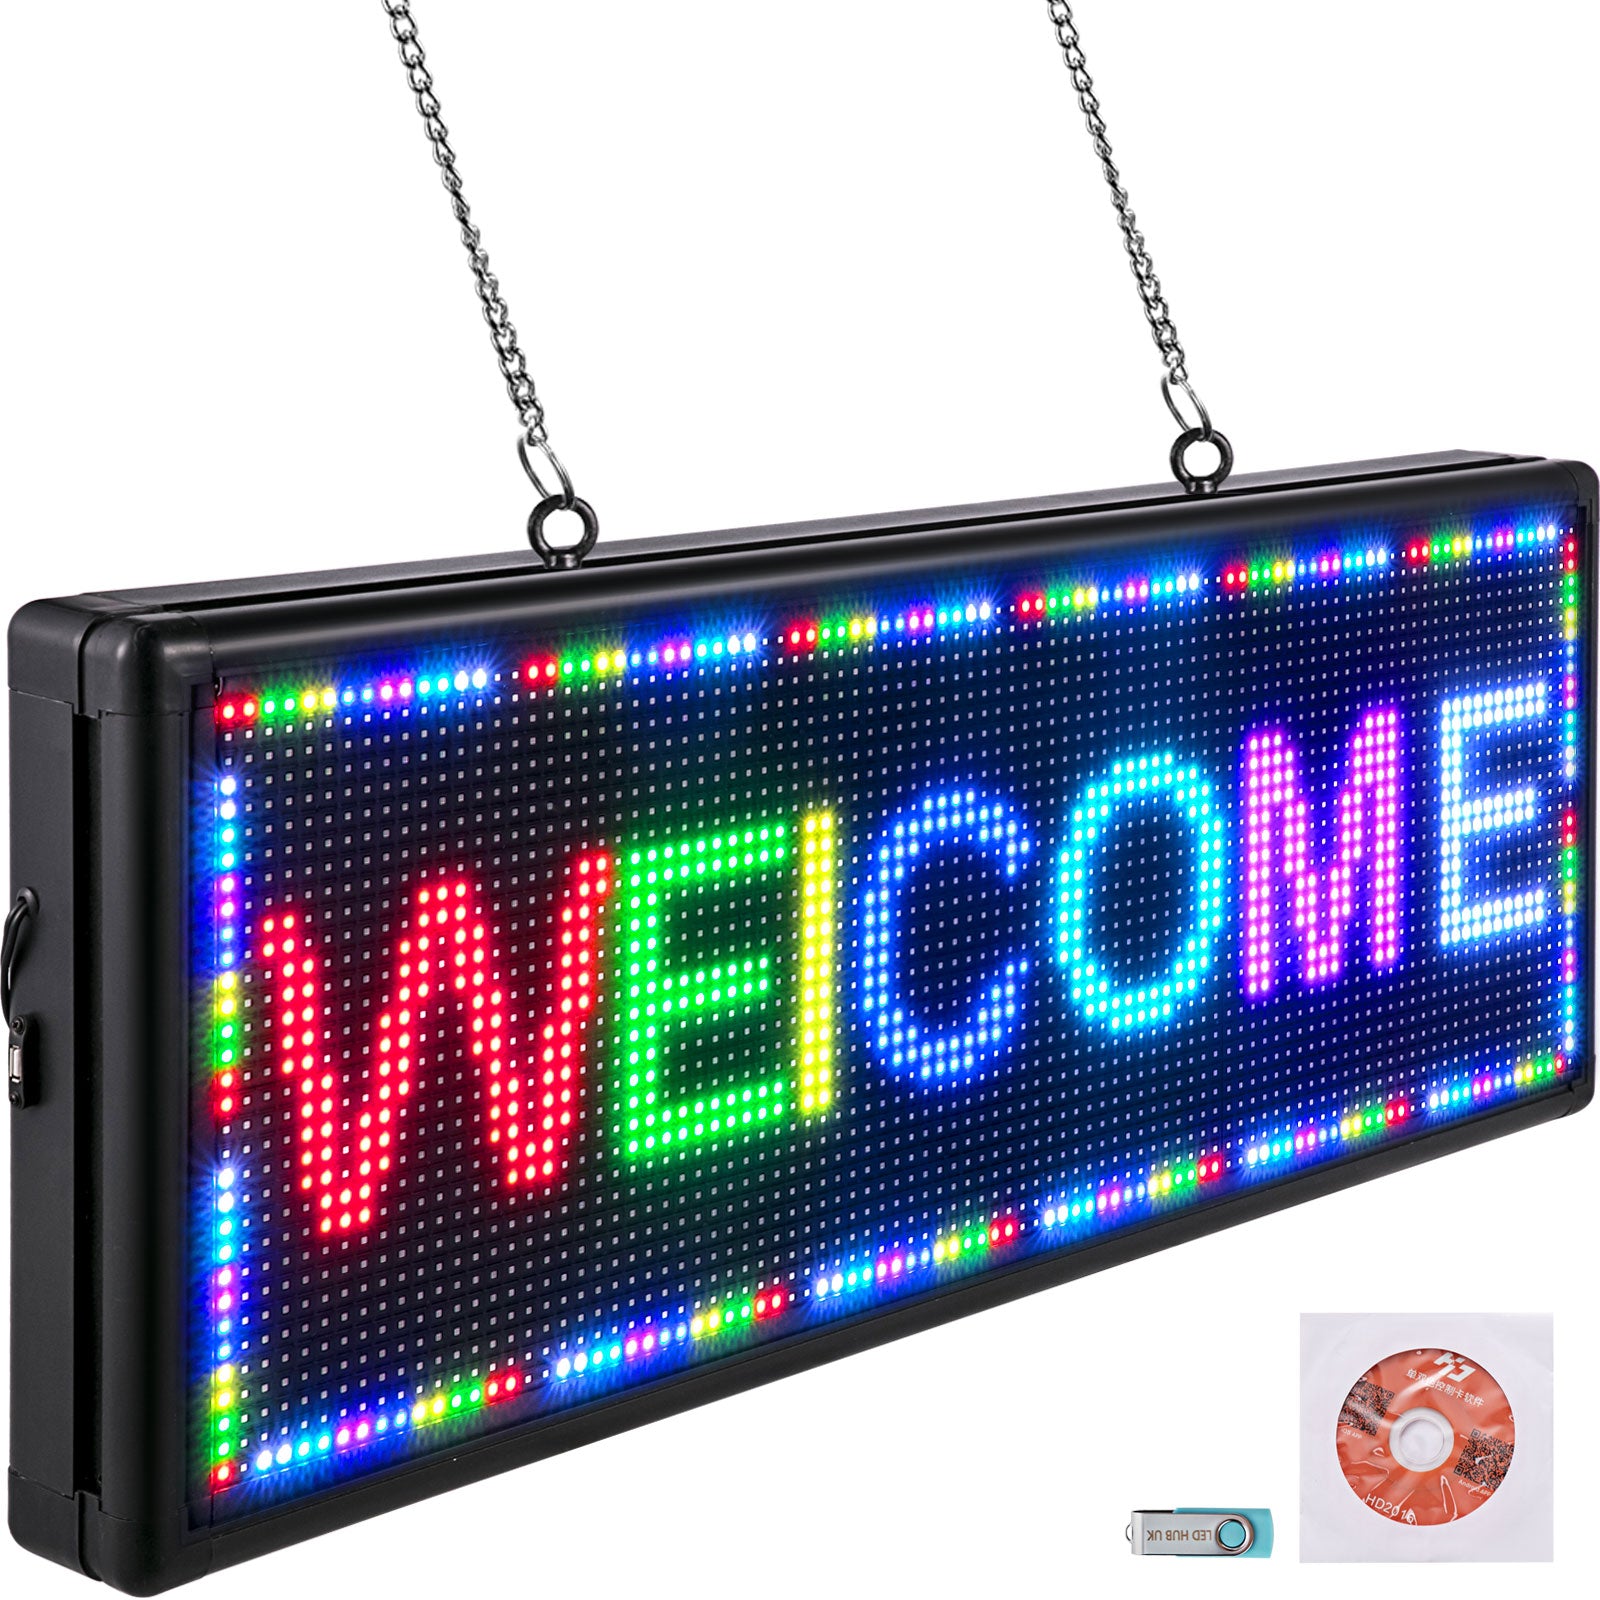 software program for red led signs